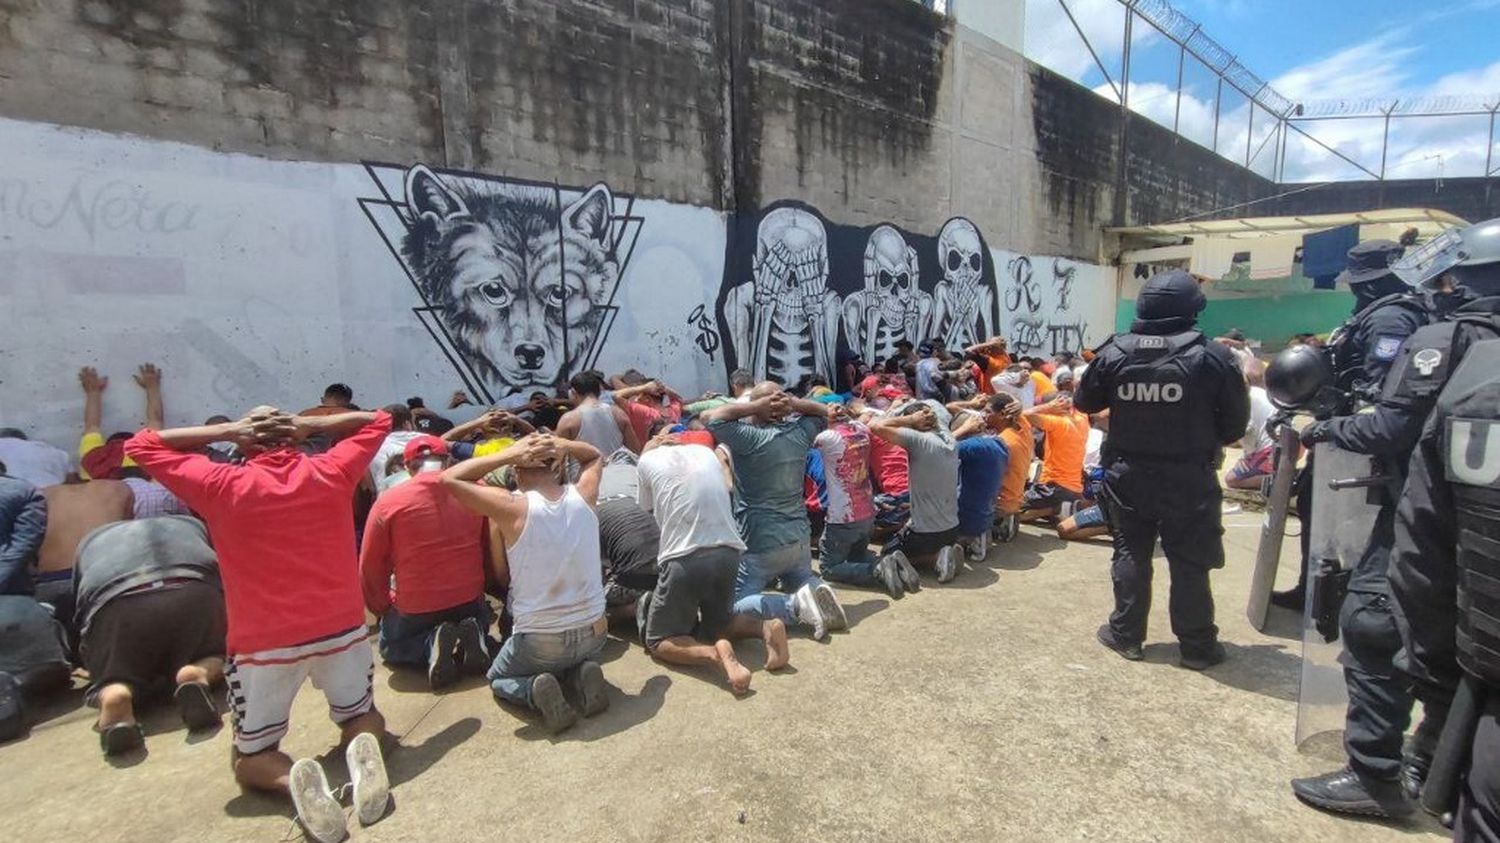 Ecuador: at least 44 detainees dead and more than 100 on the run after clashes between rival gangs in prison
